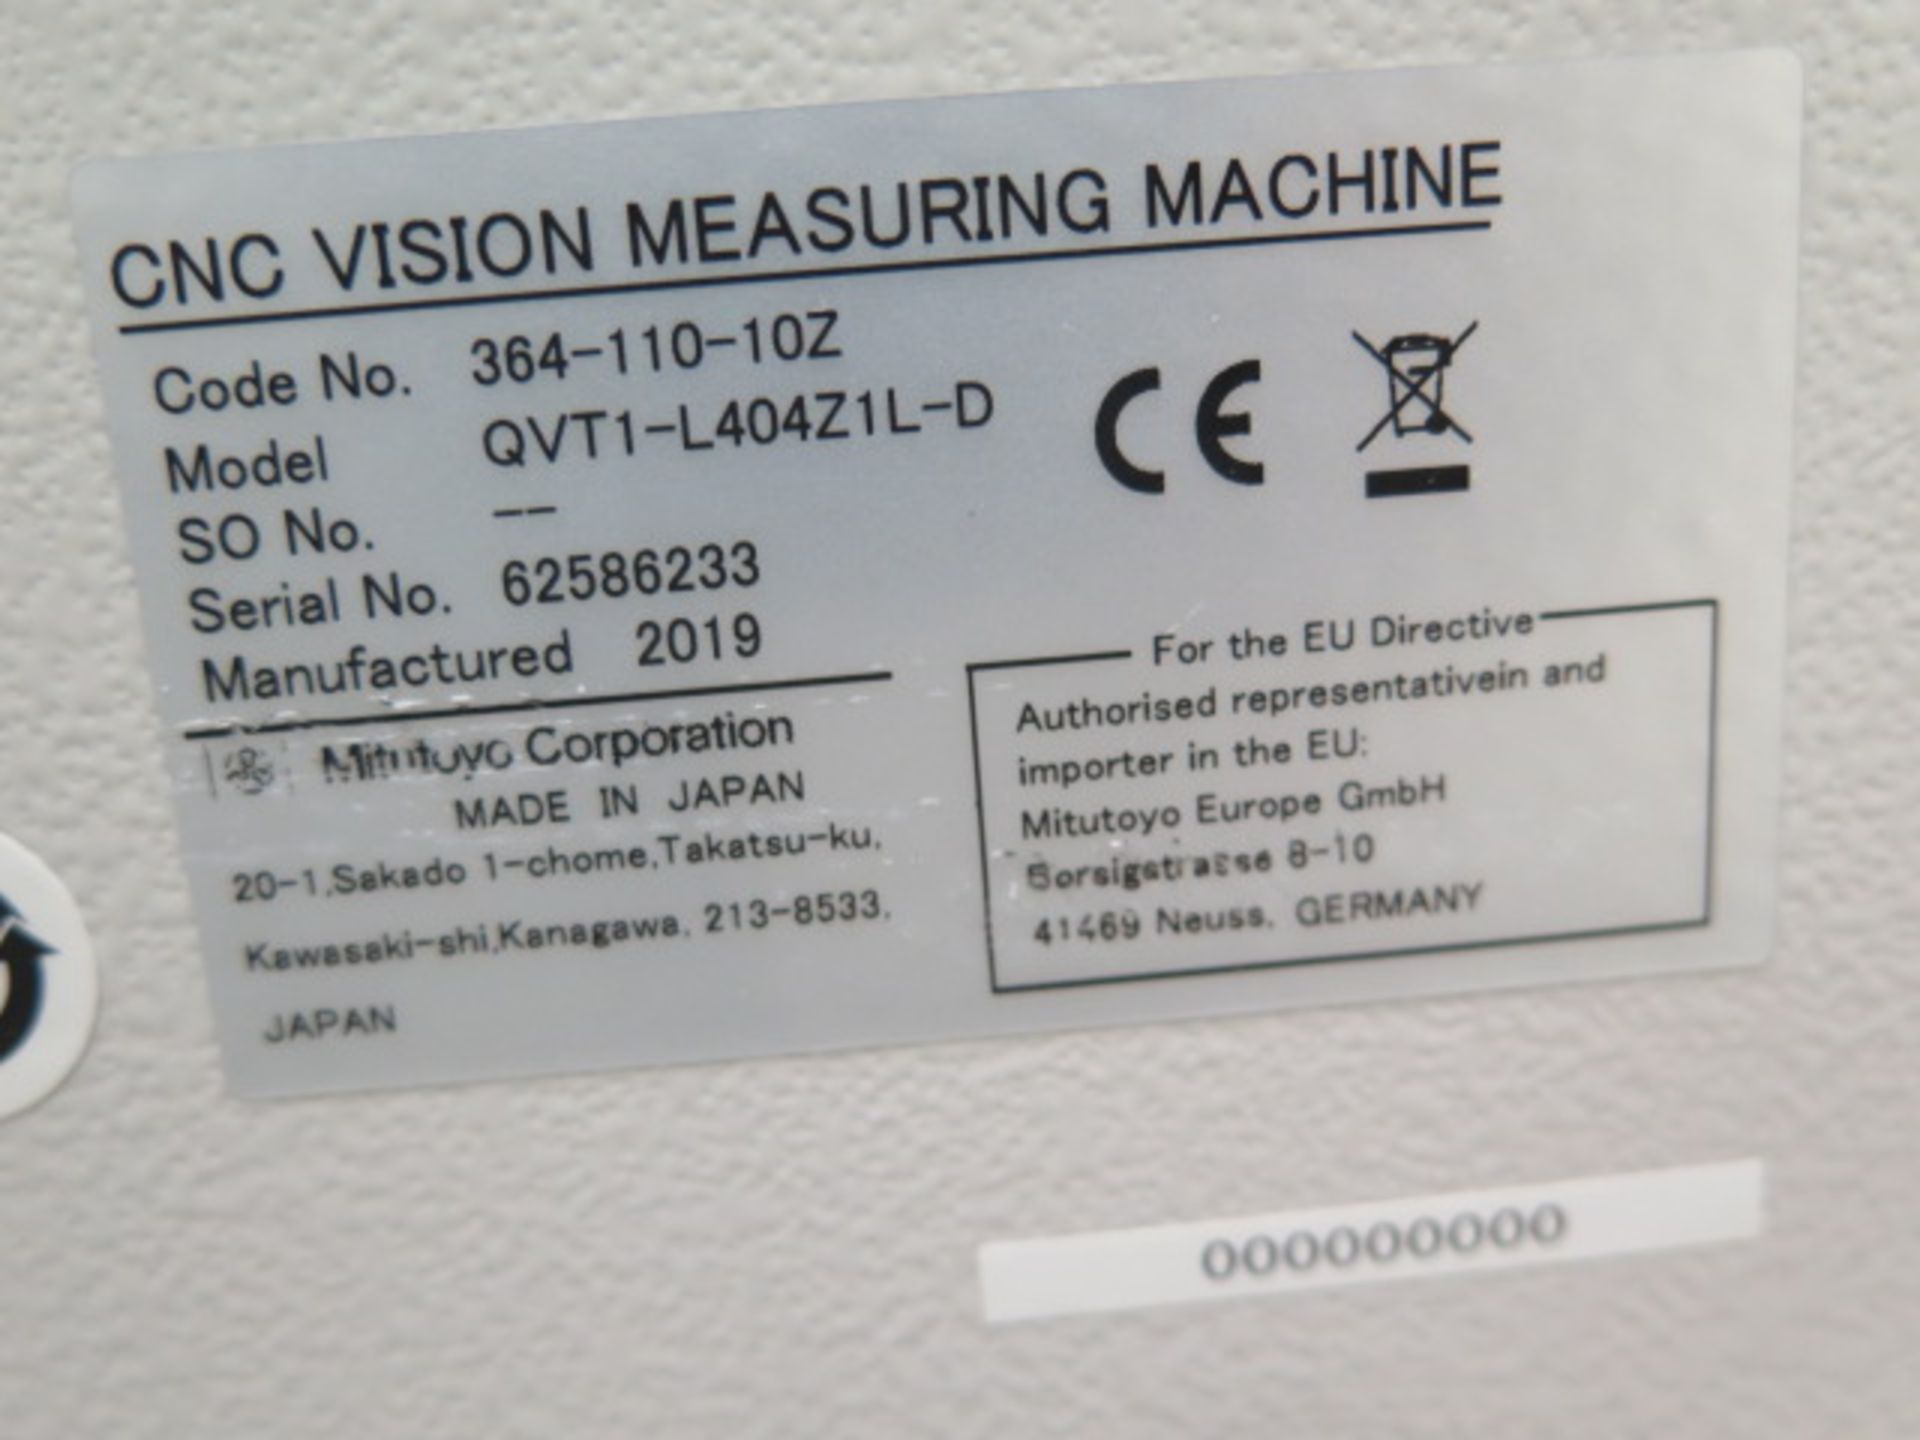 2019 Mitutoyo “Quick Vision Active” QVT1-L404ZiL-D Video CMM s/n 62586233 w/ Renishaw, SOLD AS IS - Image 26 of 26